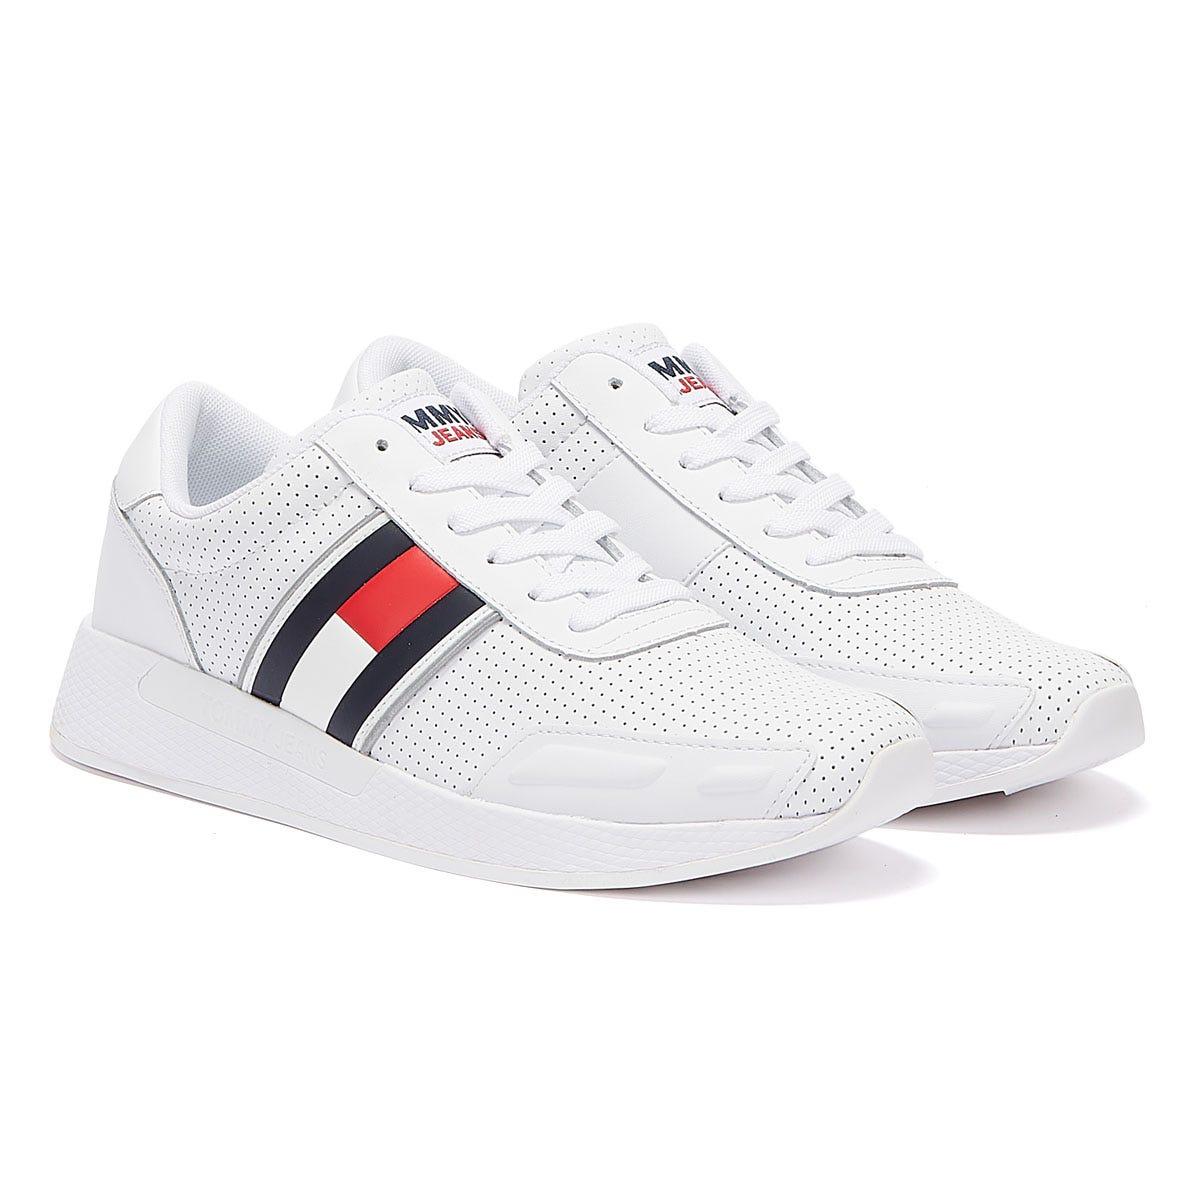 Tommy Hilfiger Perforated Leather Trainers Top Sellers, 52% OFF |  www.chine-magazine.com